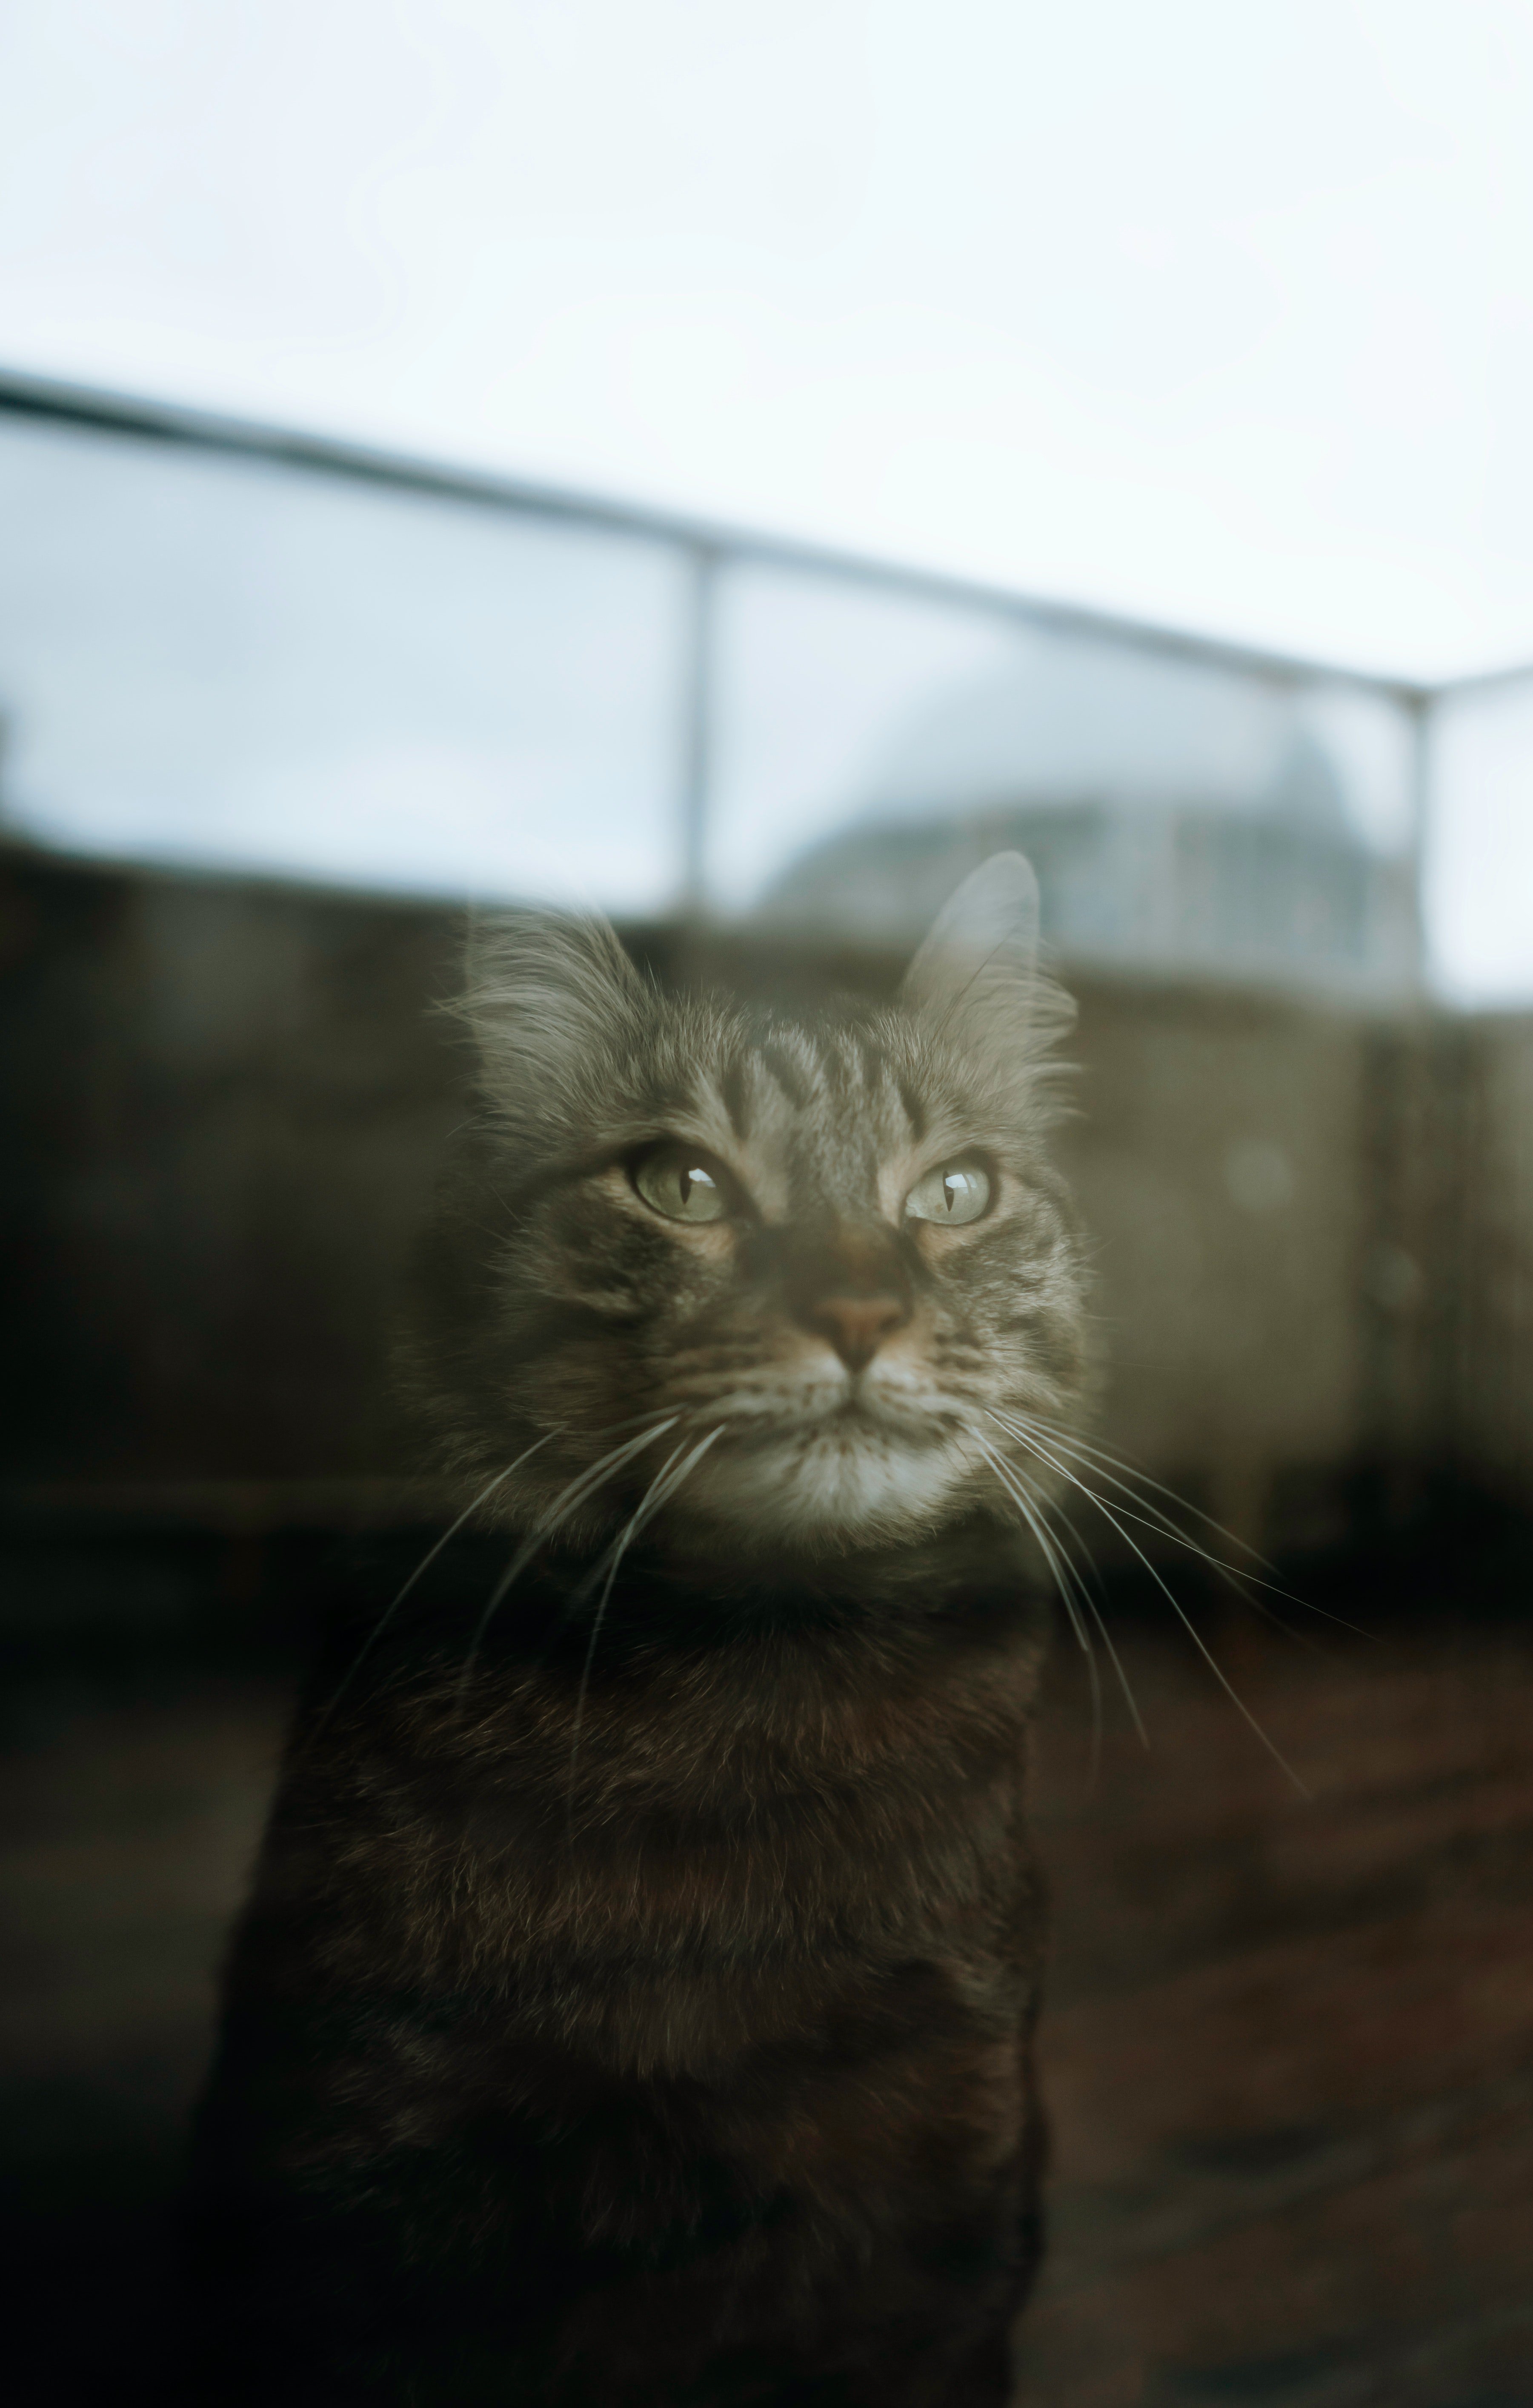 An image of a cat | Photo: Pexels